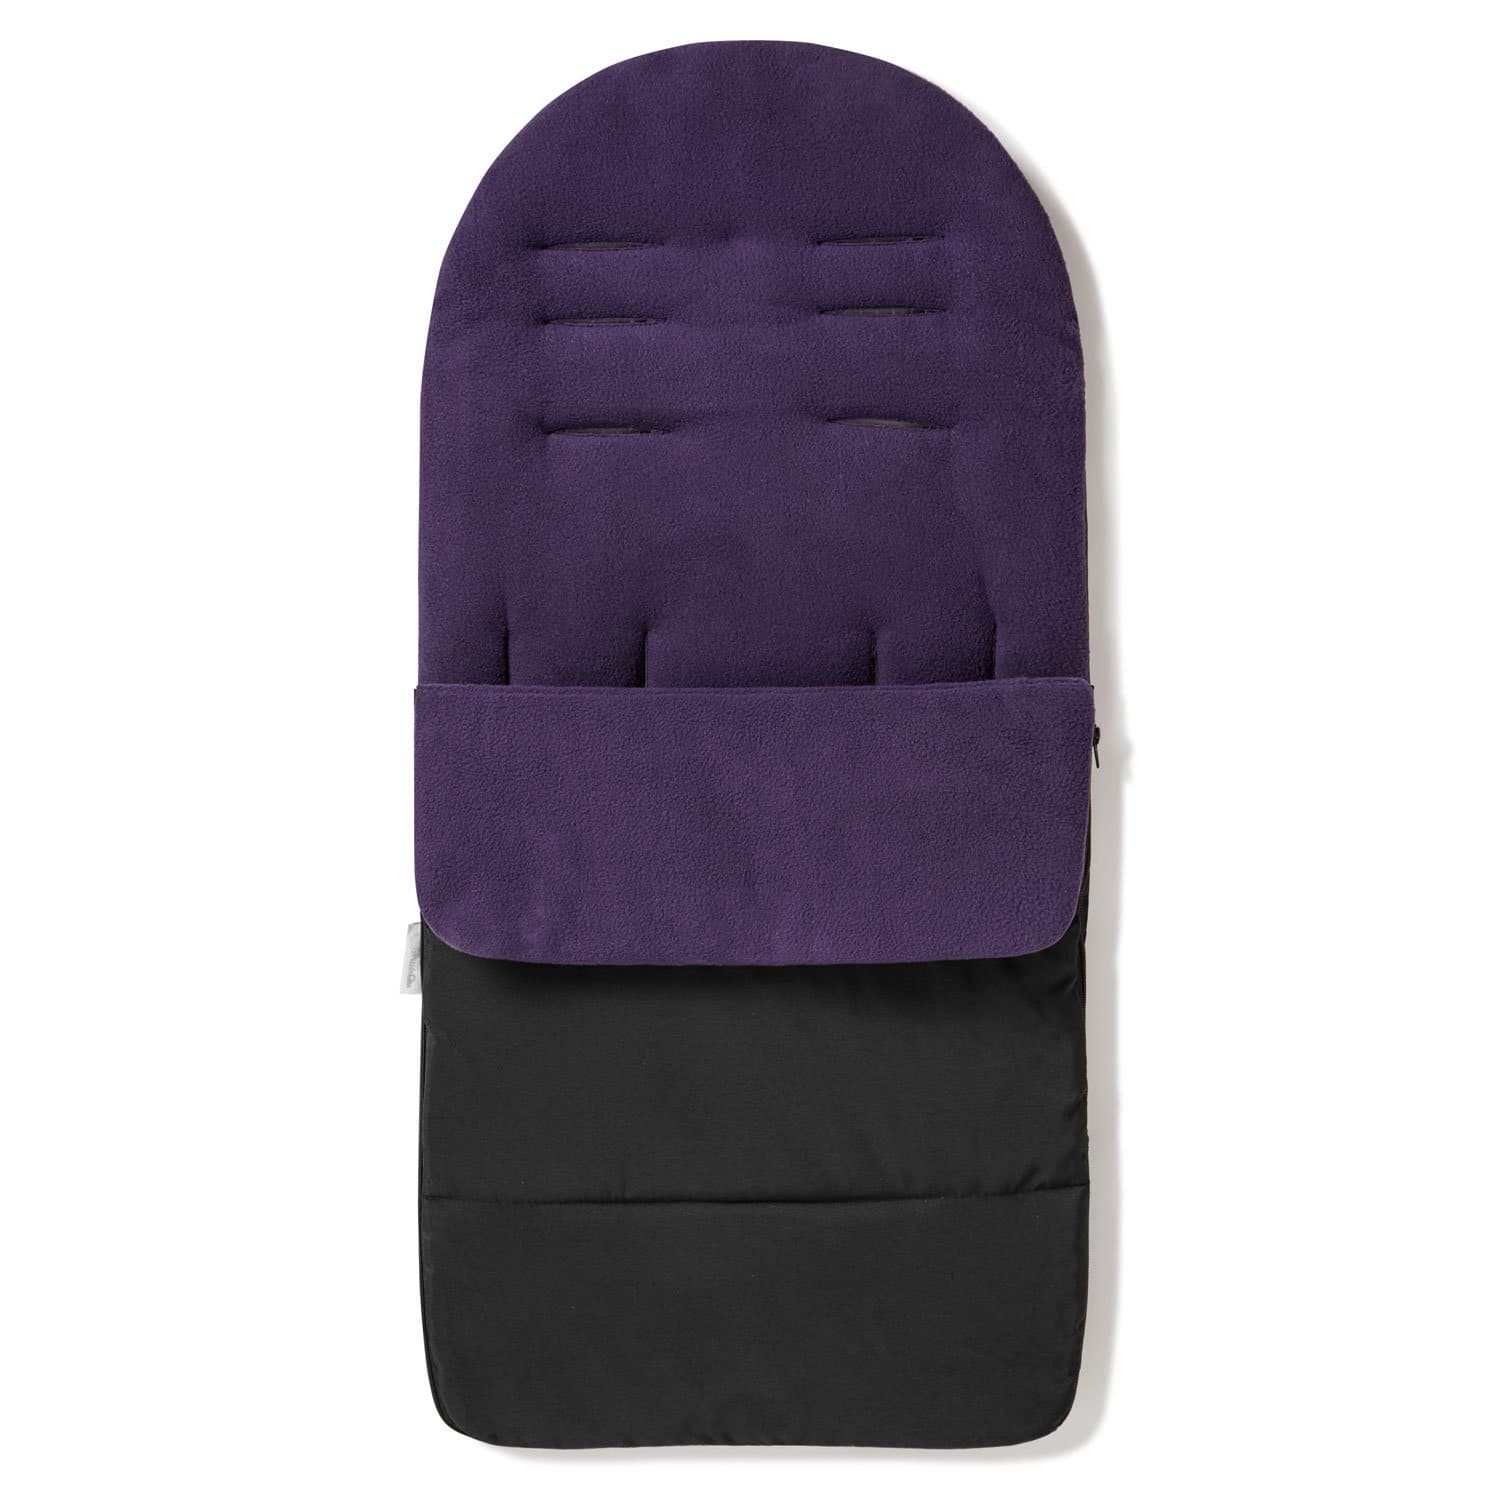 Premium Footmuff / Cosy Toes Compatible with Teutonia - For Your Little One